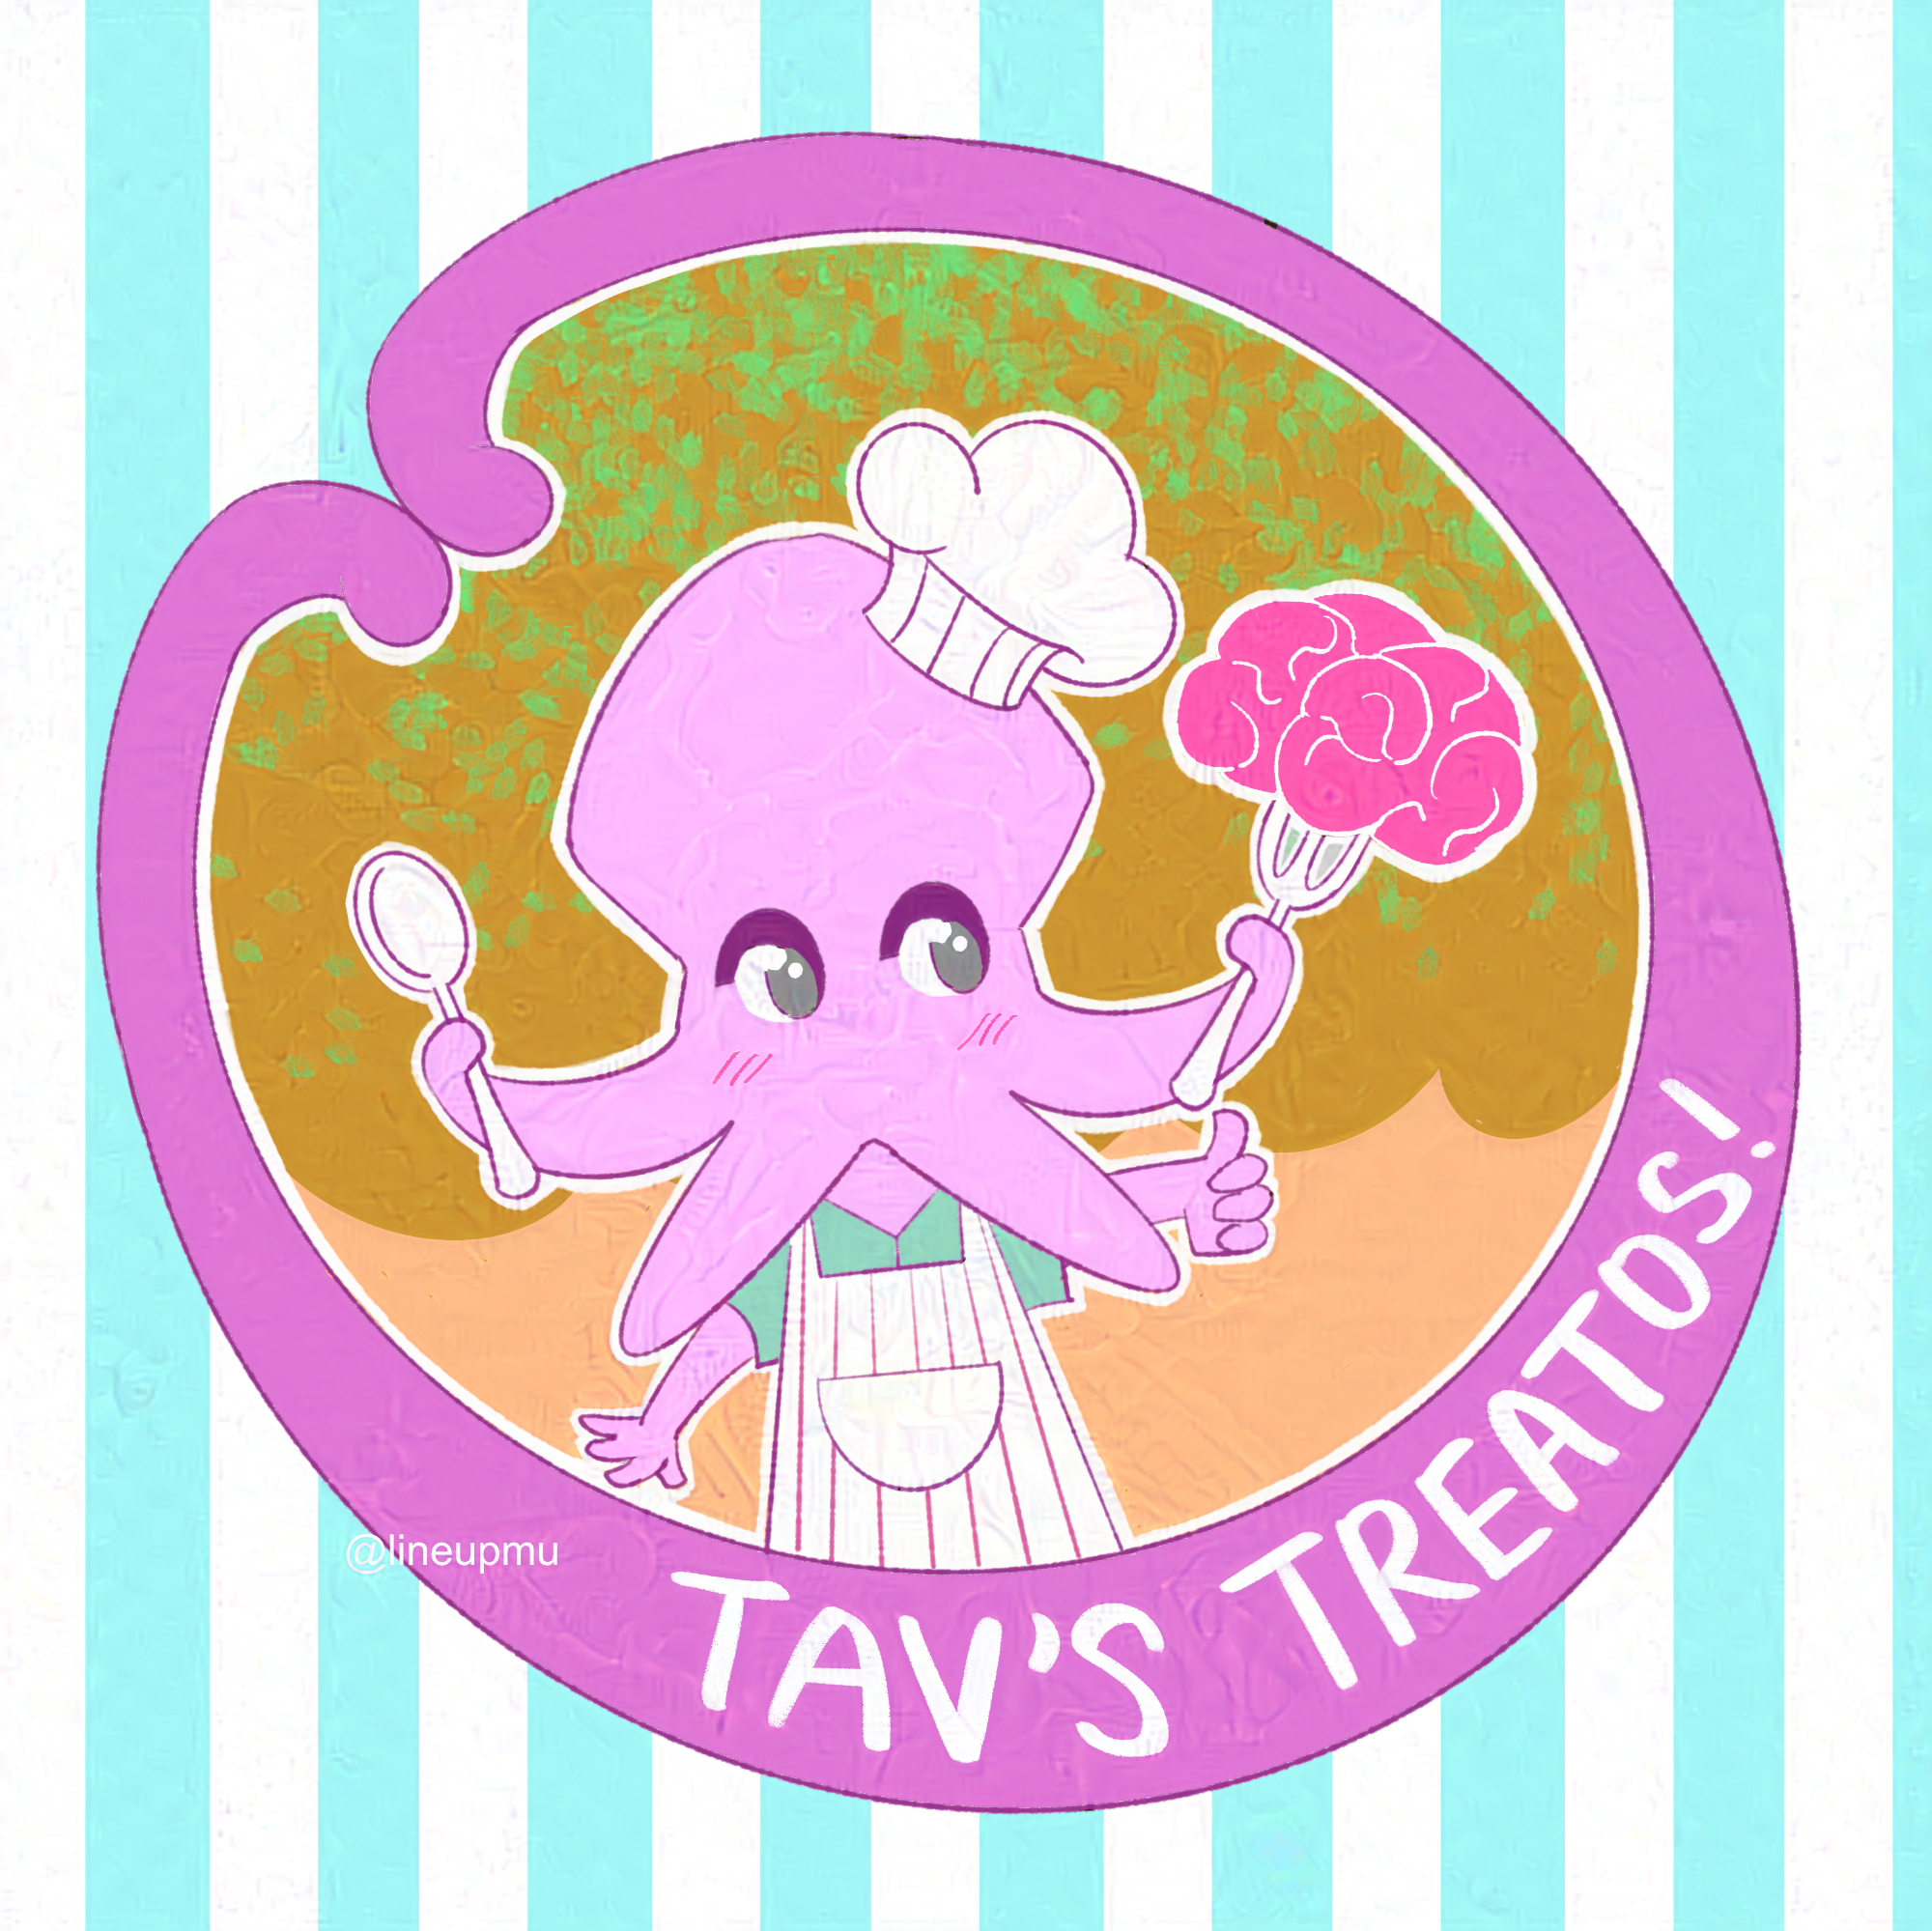 A variant of the Tav's Treatos logo, where the circle is replaced with a takoyaki.